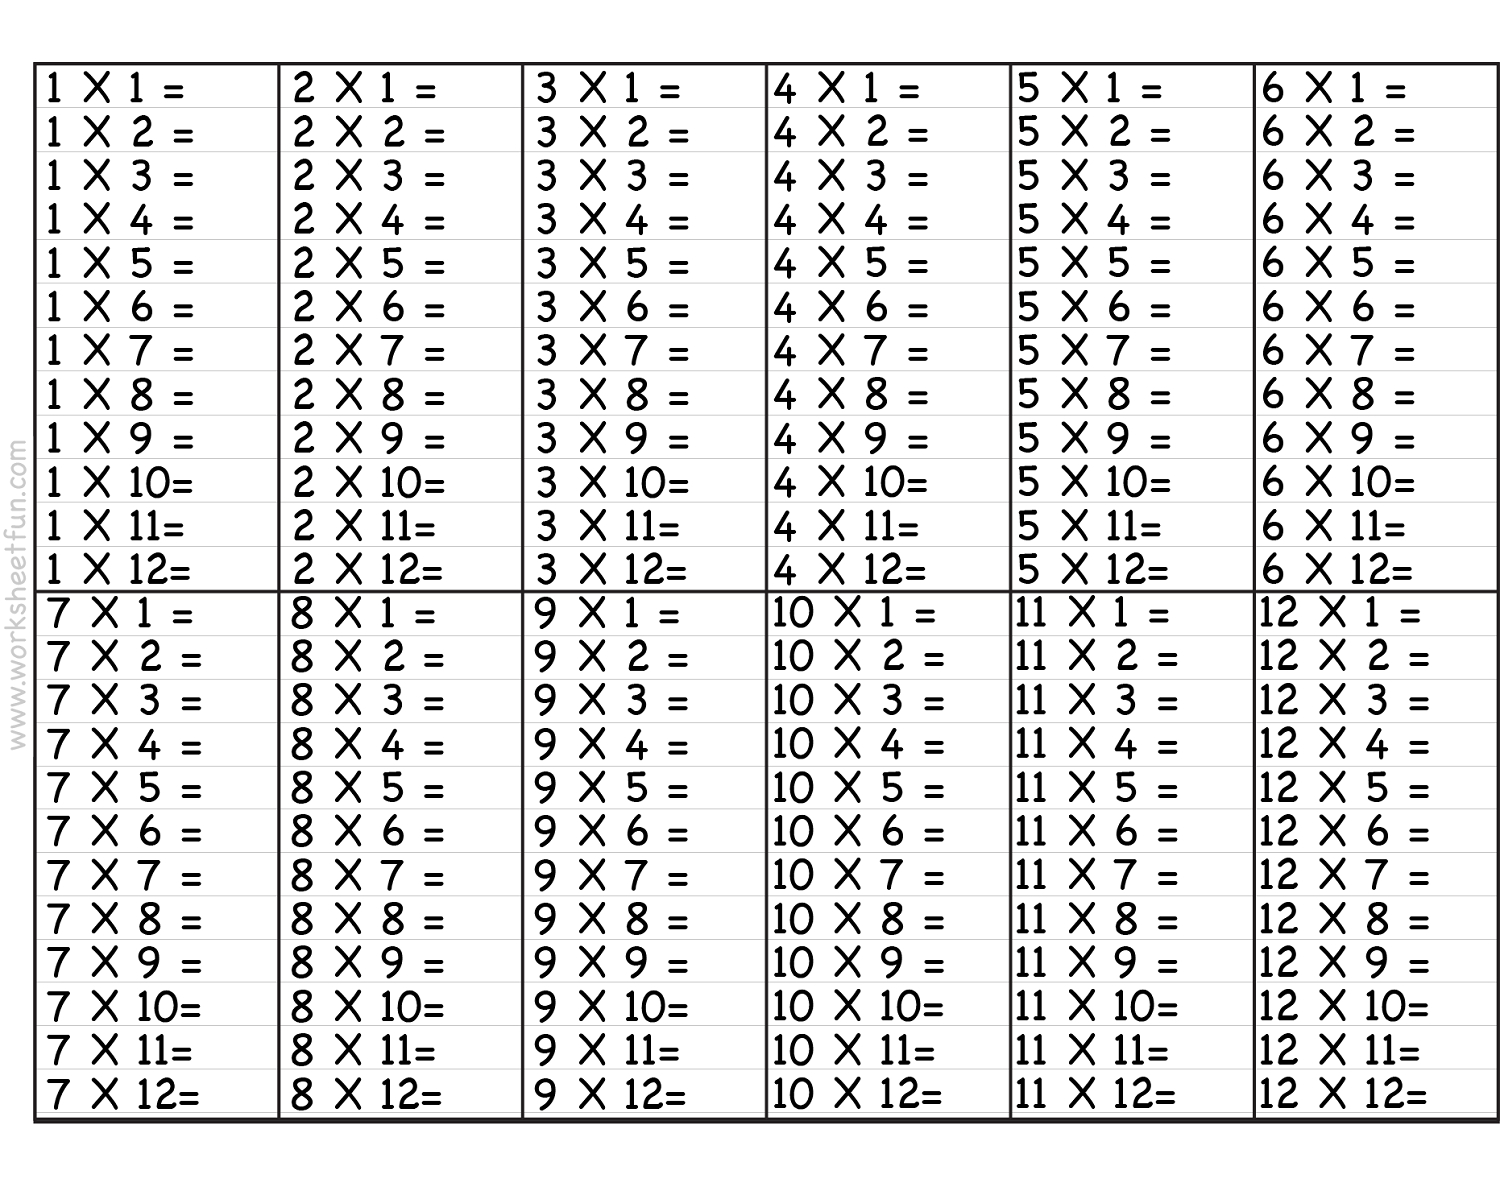 Large Multiplication Table For Children Mathematics Lesson throughout Printable Multiplication Table 1-9